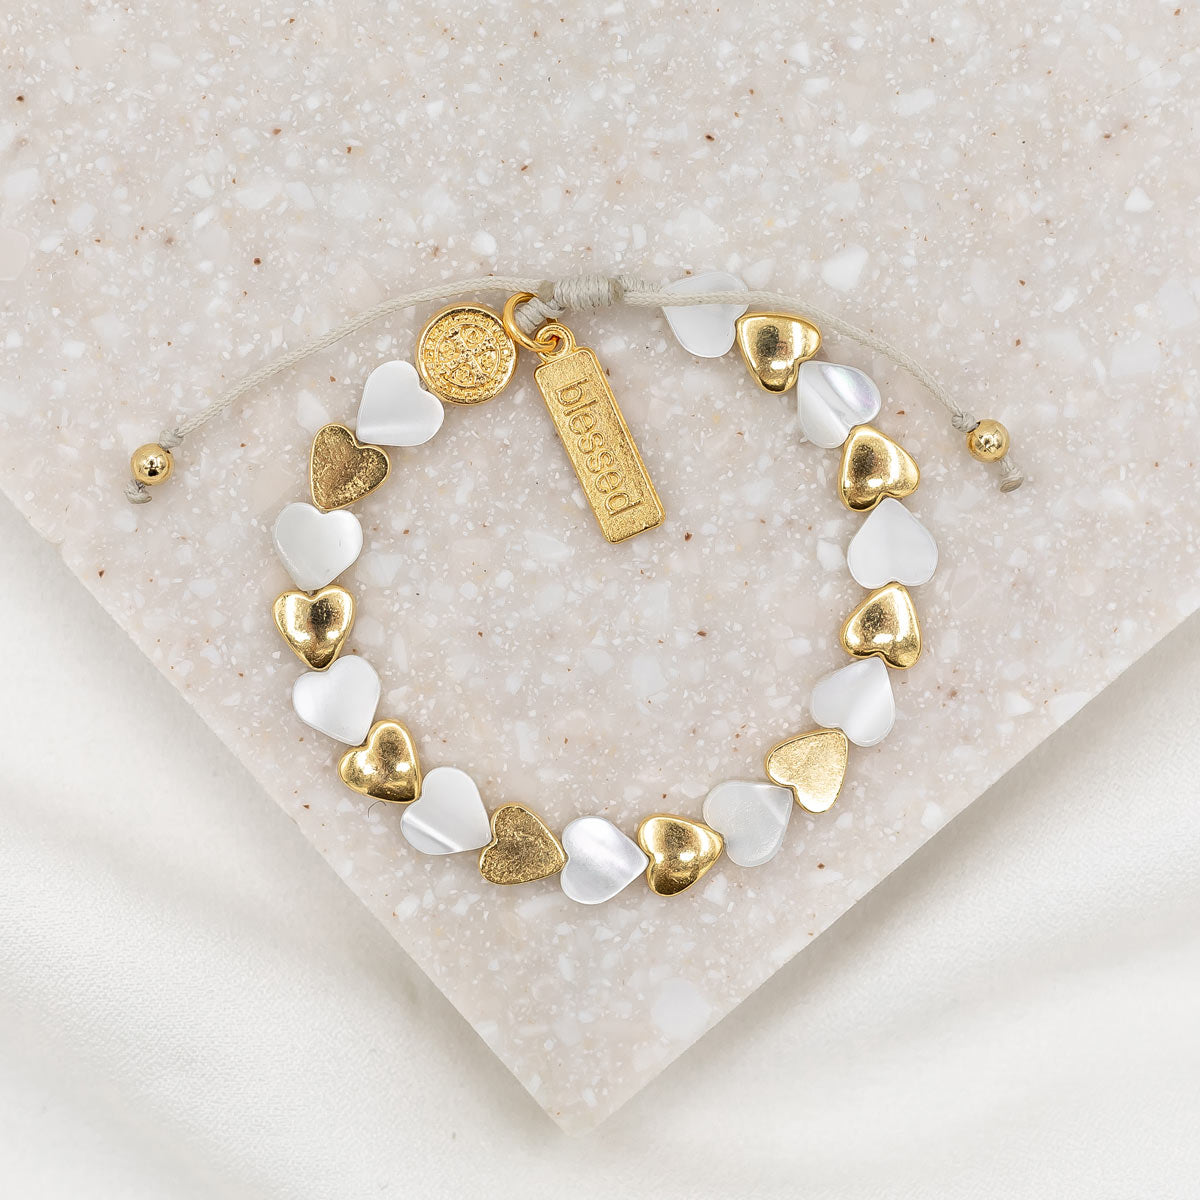 Sisters of the Heart Bracelets - Handwoven Mother of Pearl and Beads – My  Saint My Hero